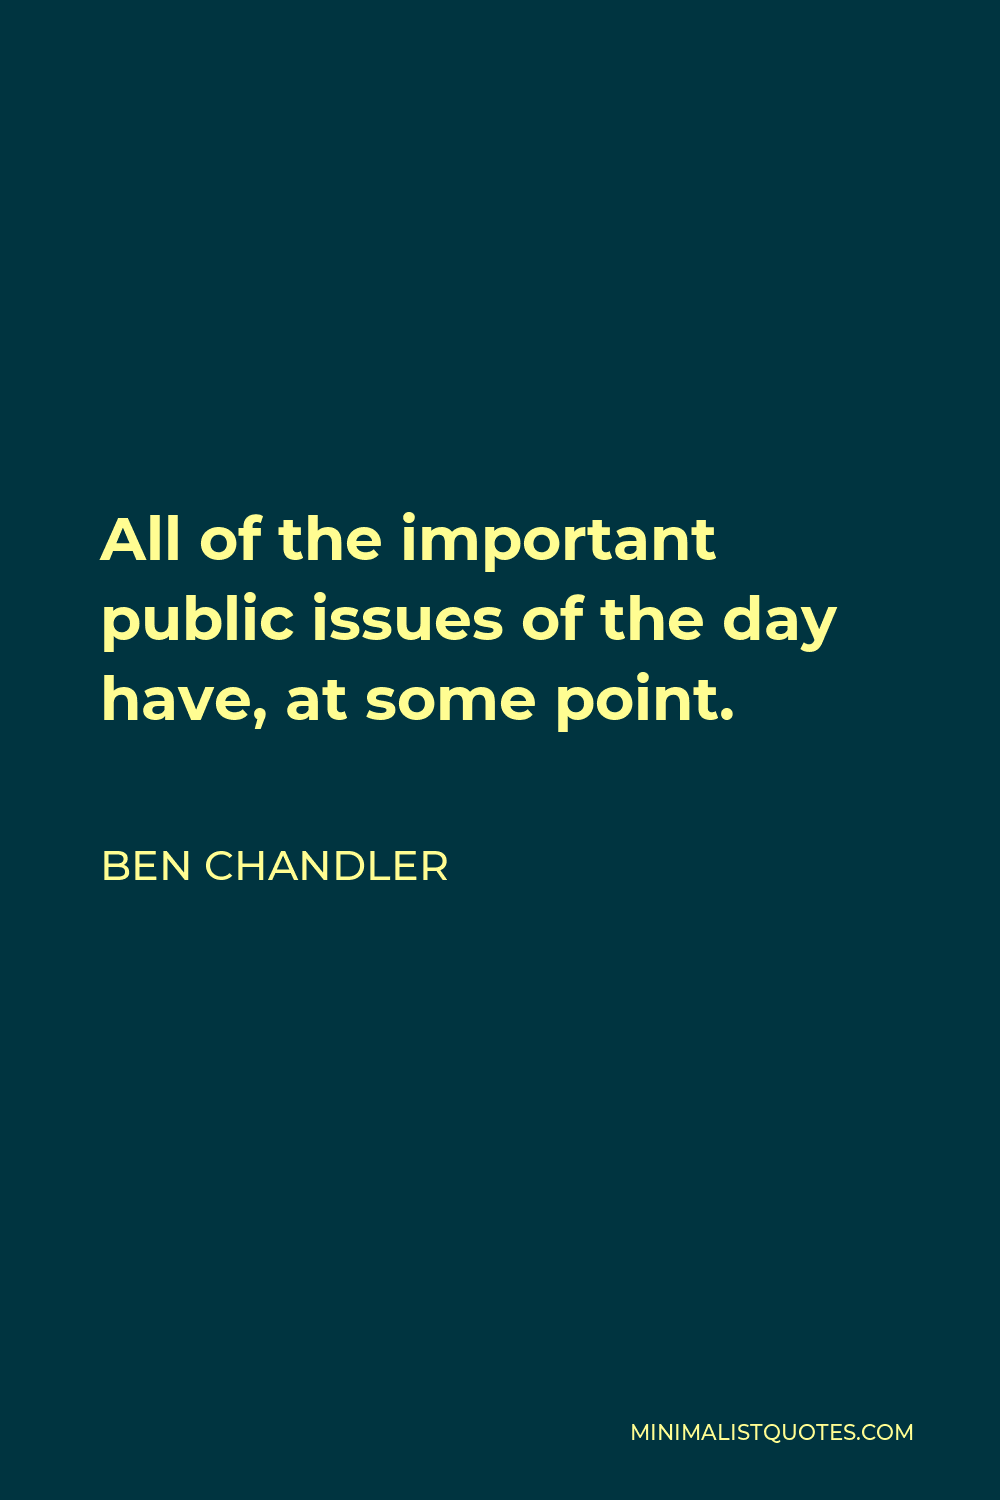 Ben Chandler Quote - All of the important public issues of the day have, at some point.